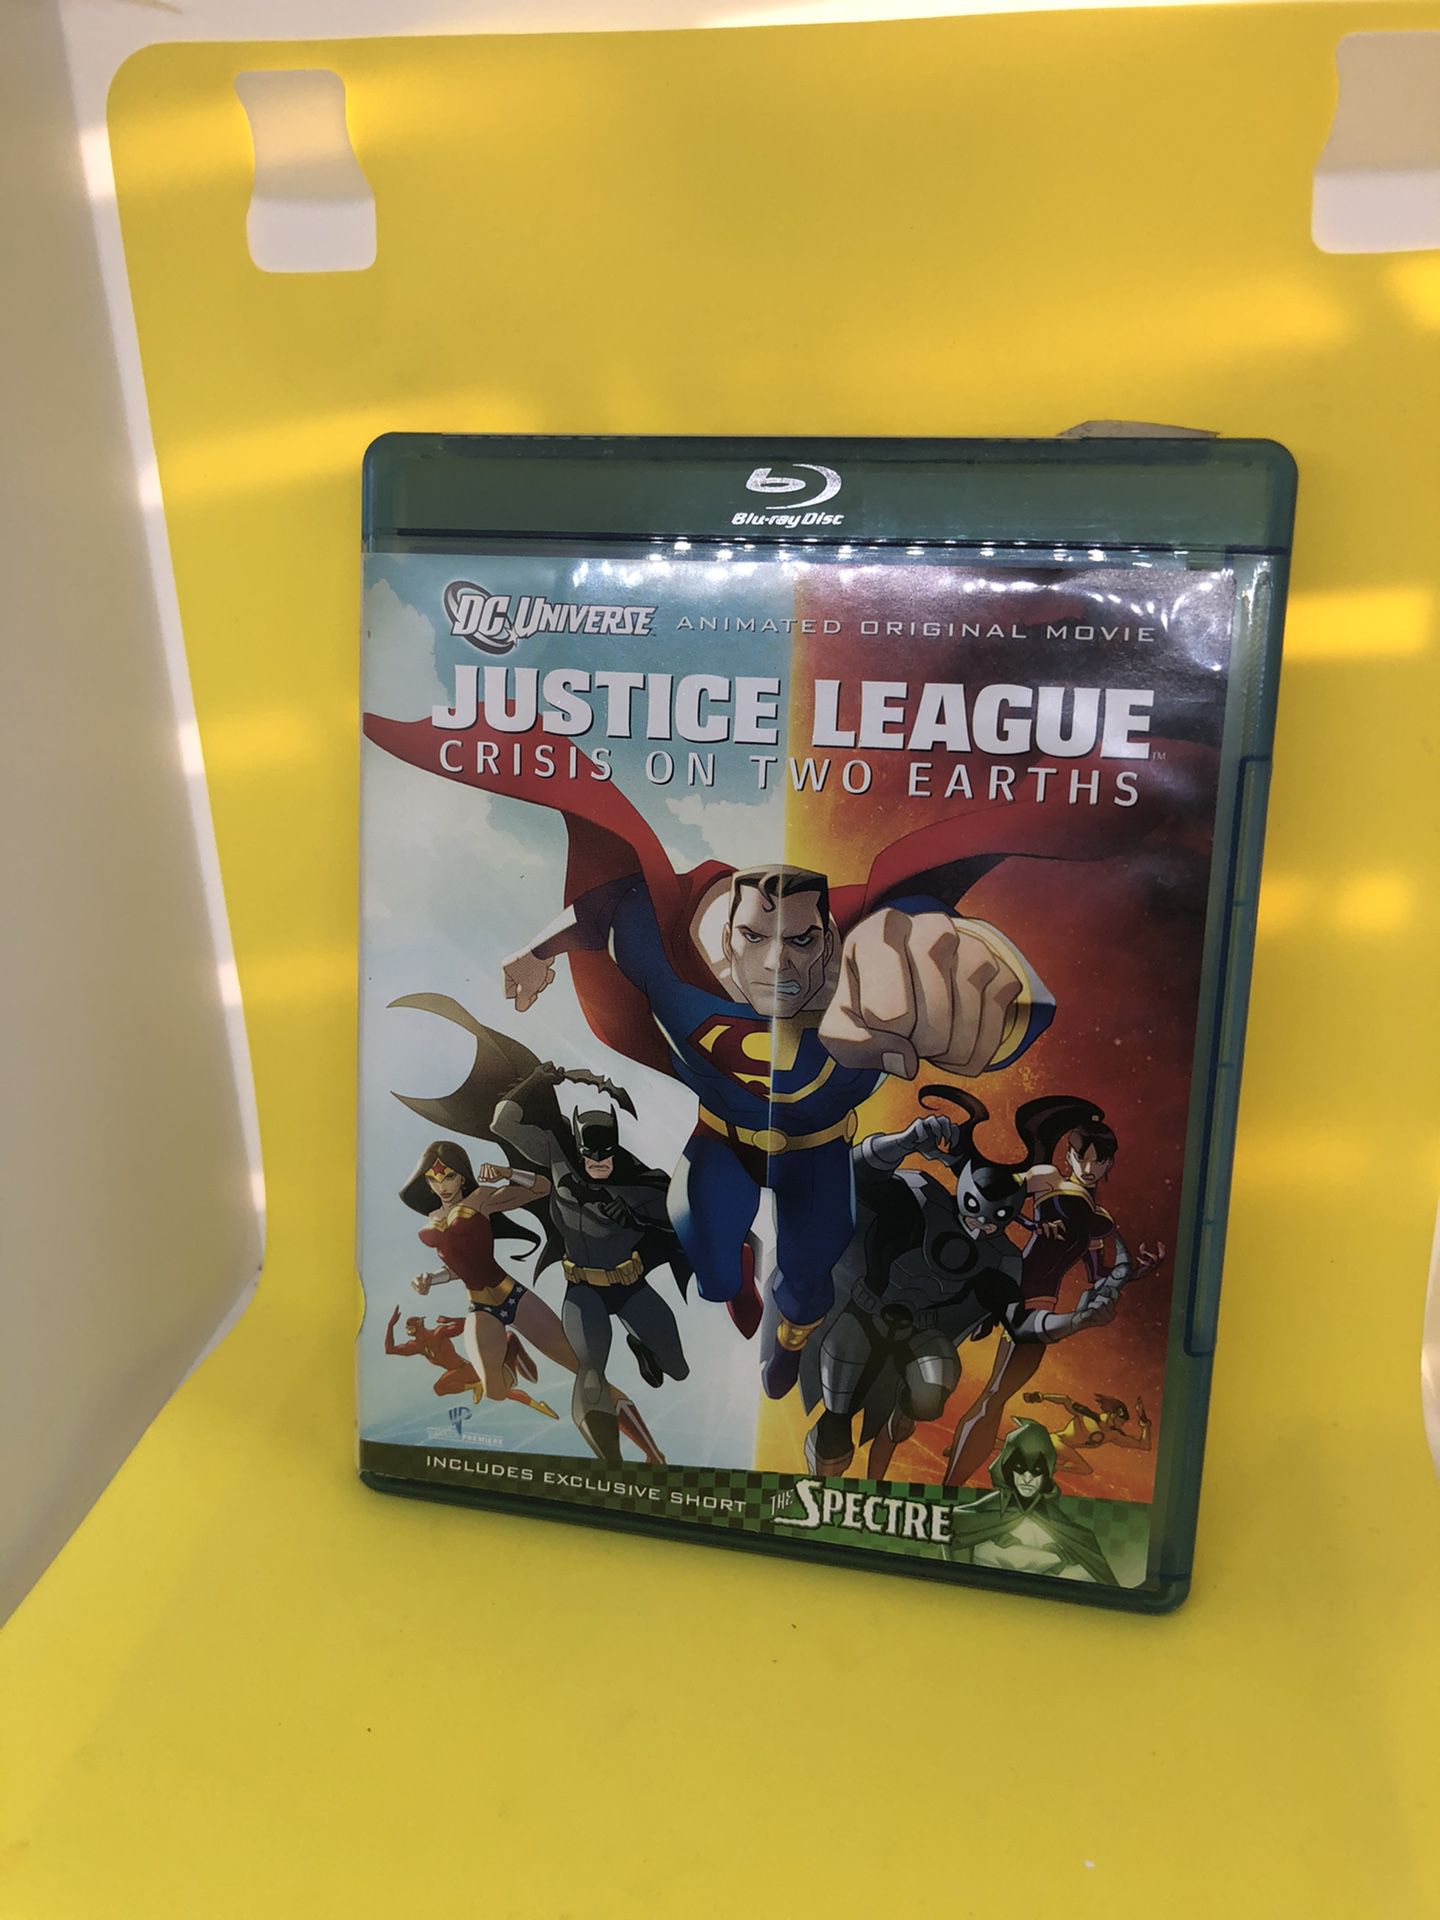 Justice League: Crisis on Two Earths (2010) Blu-Ray